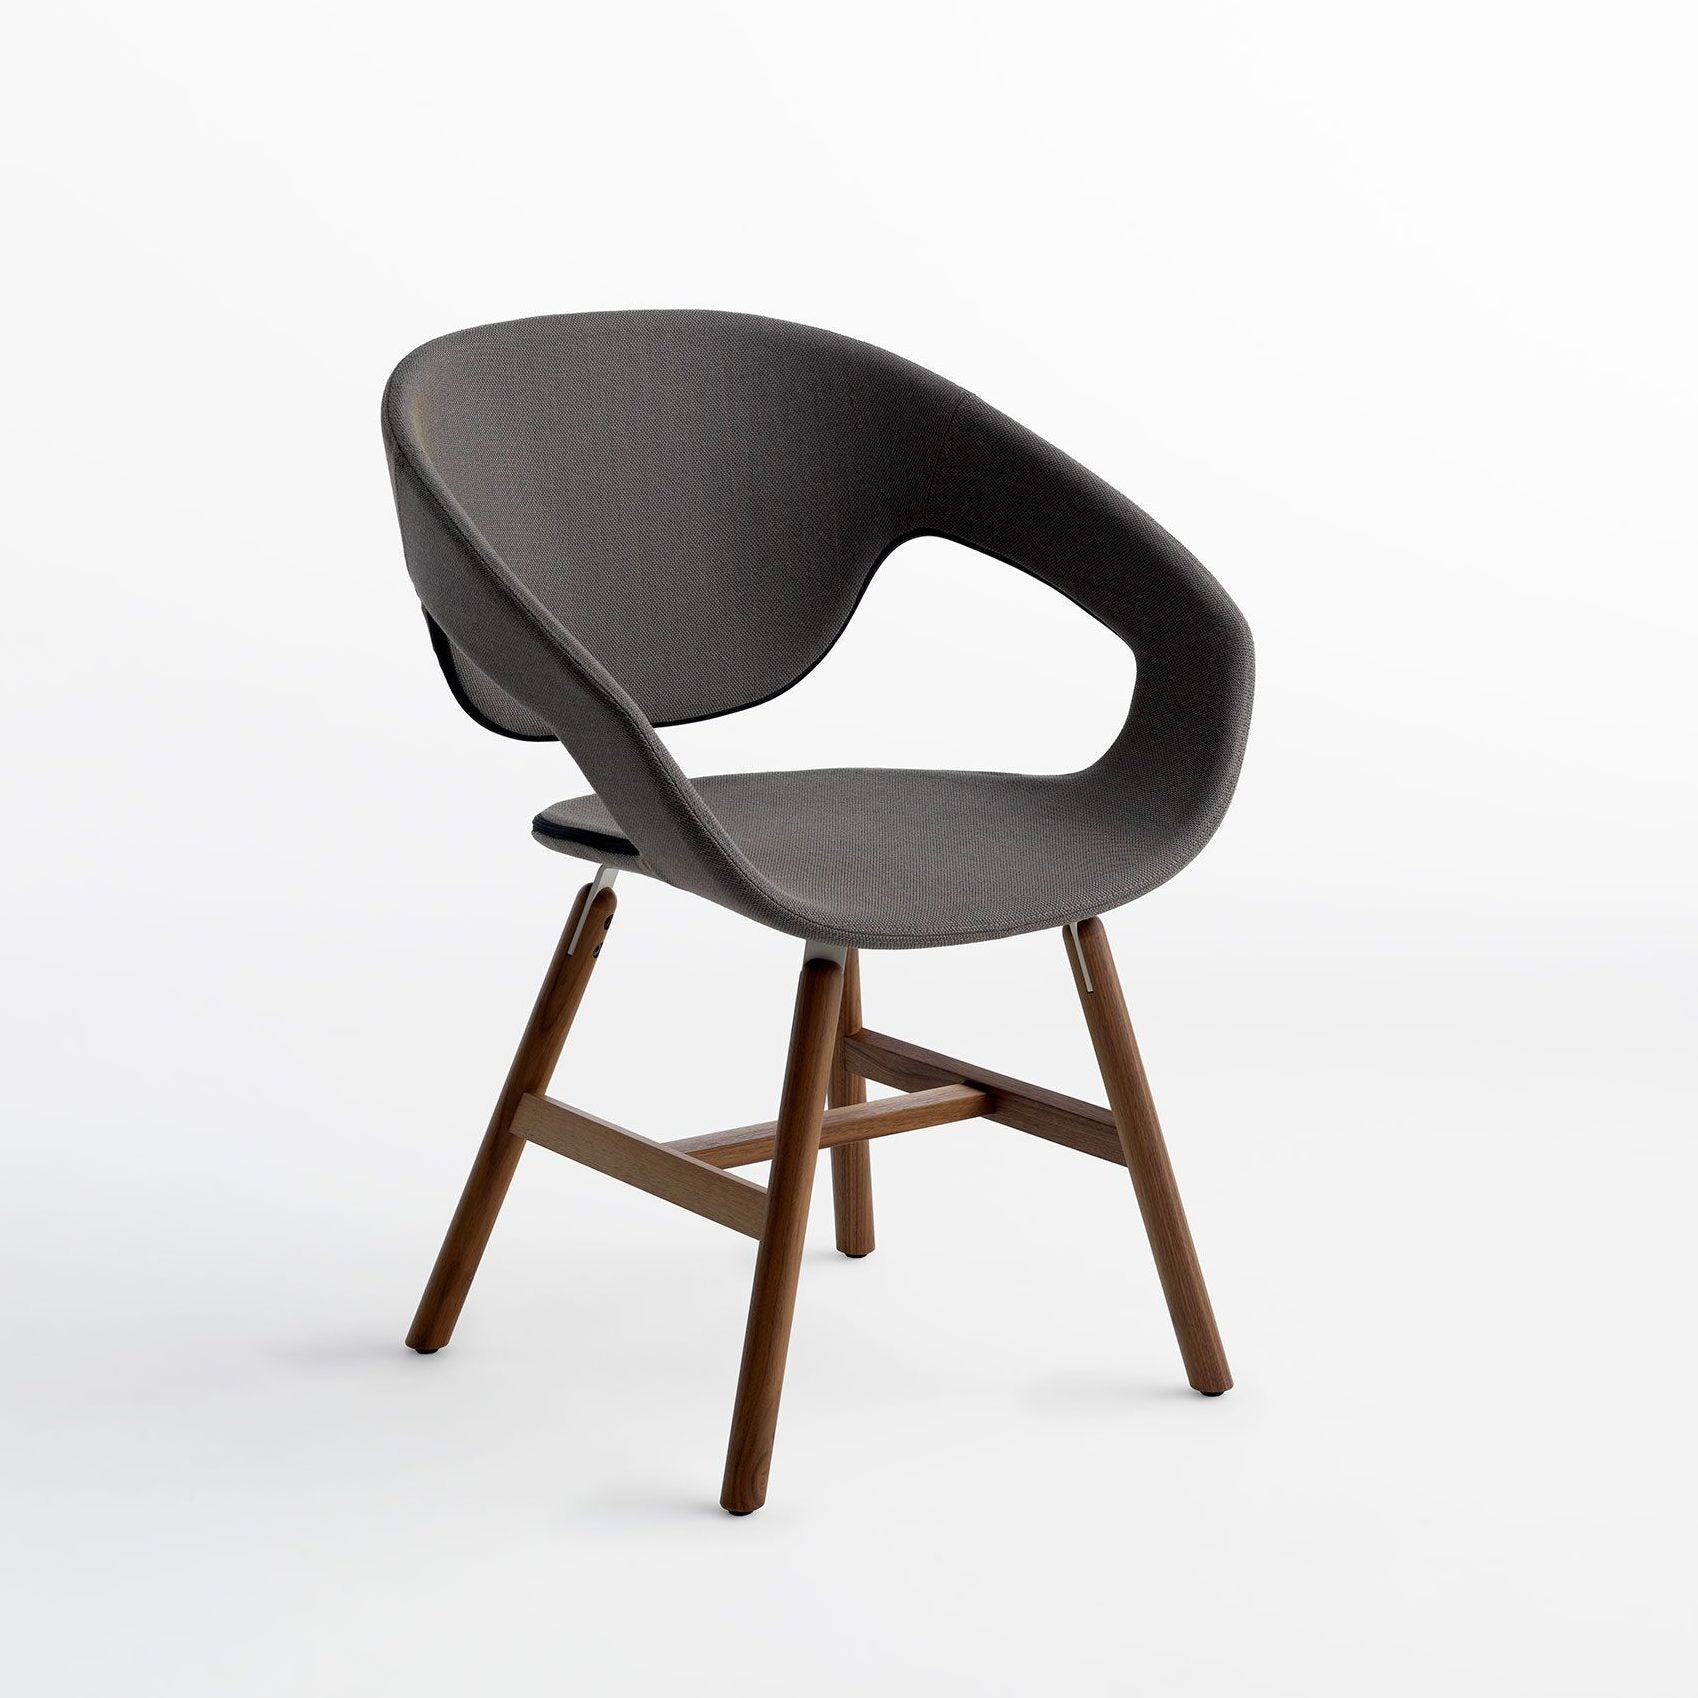 Horm Casamania Vad Wood Upholstered Chair